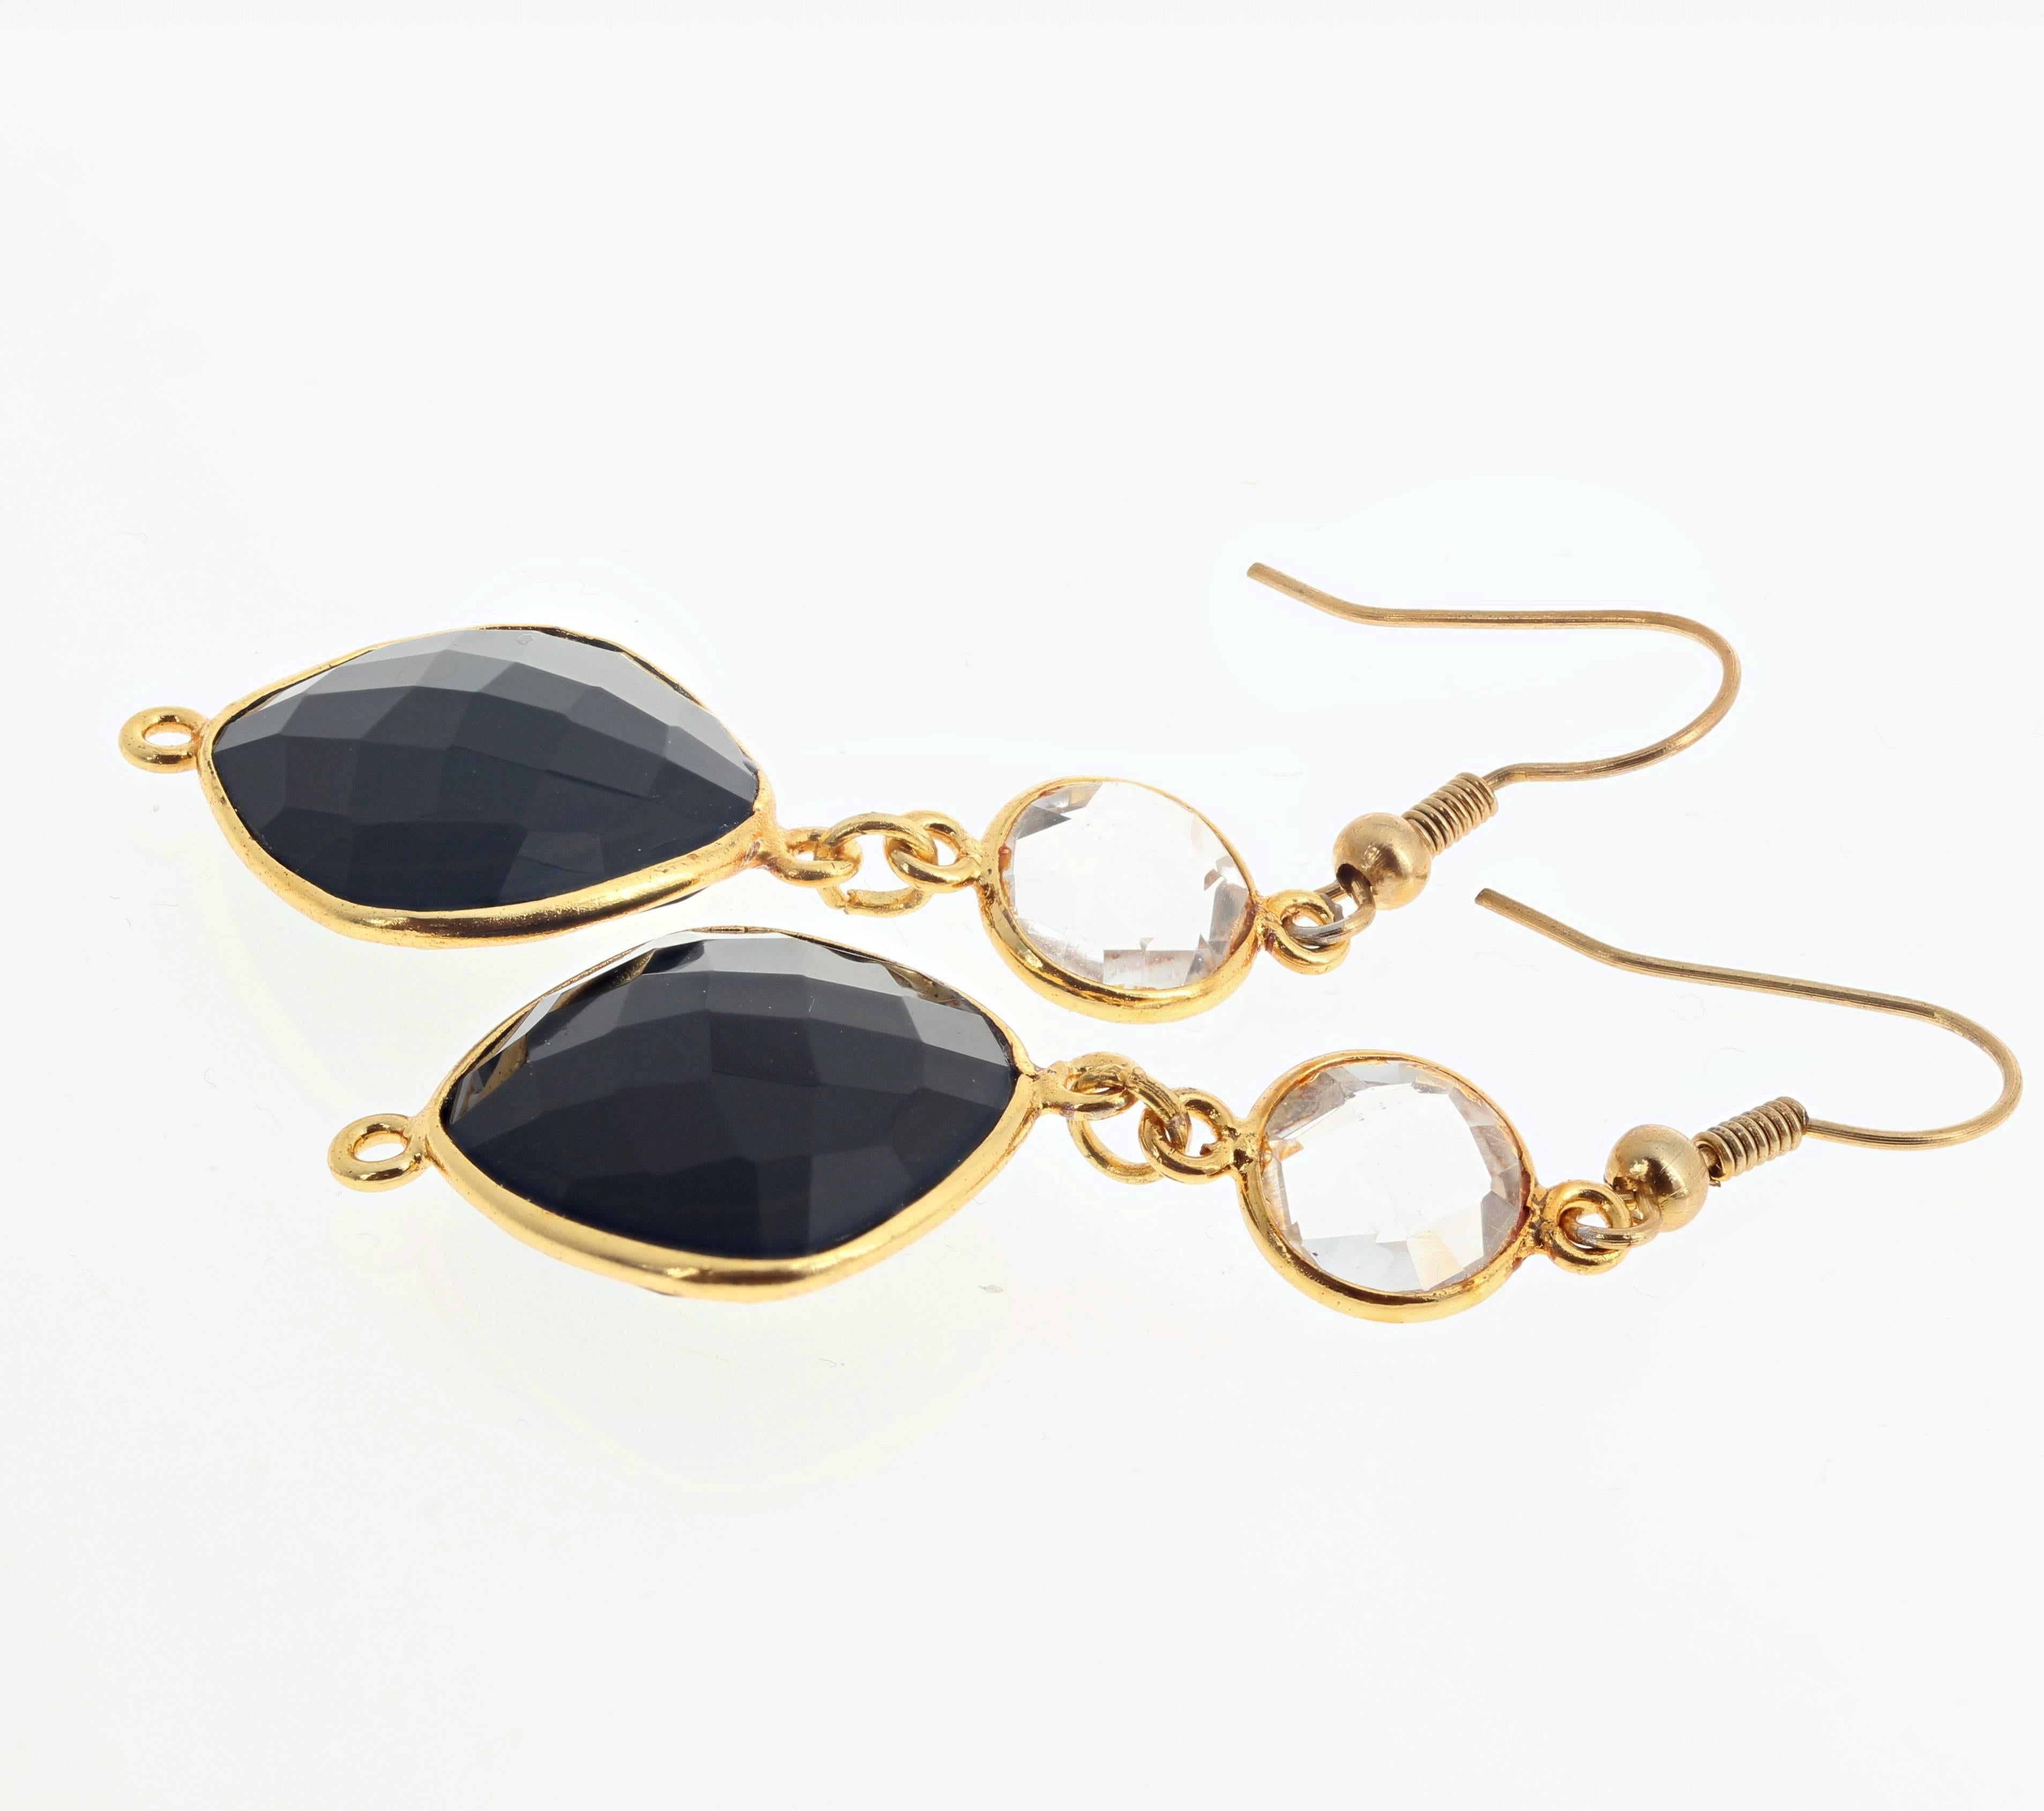 Women's Unique Handmade Onyx and Quartz Gold Plated Hook Earrings